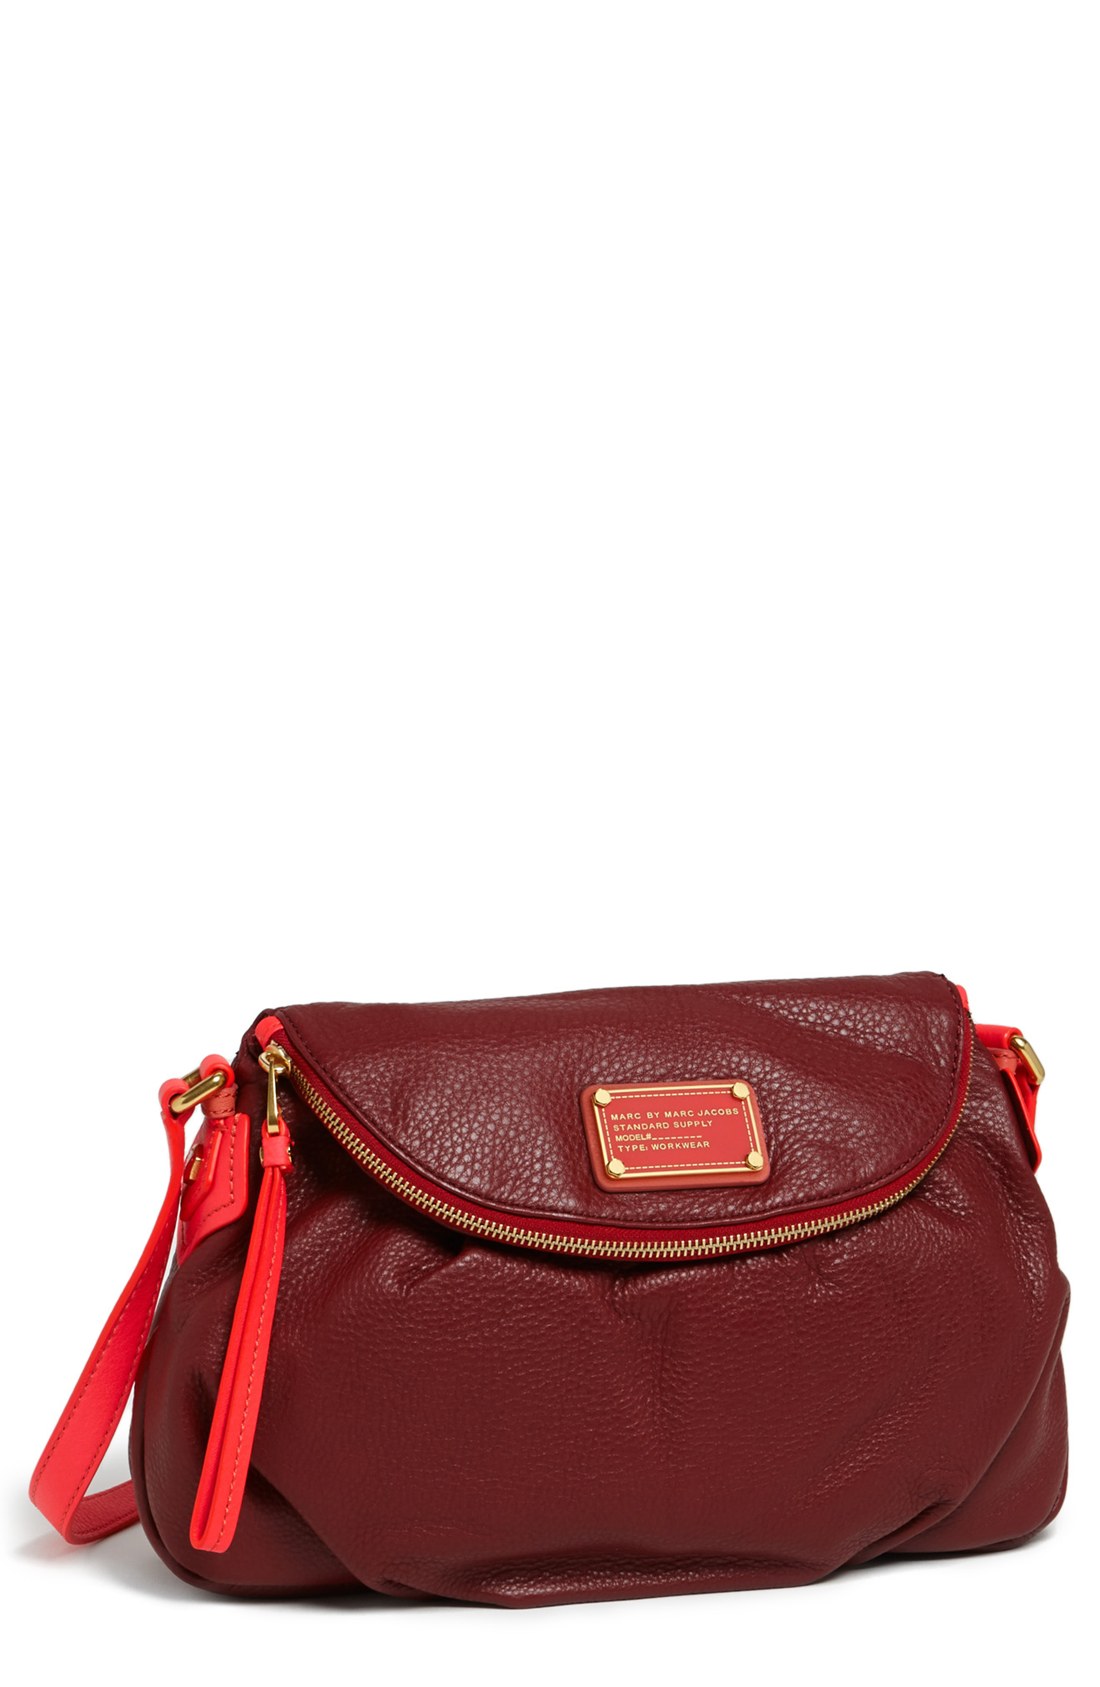 Marc By Marc Jacobs Classic Q Natasha Leather Crossbody Bag in Red (Cabernet Red Multi) | Lyst